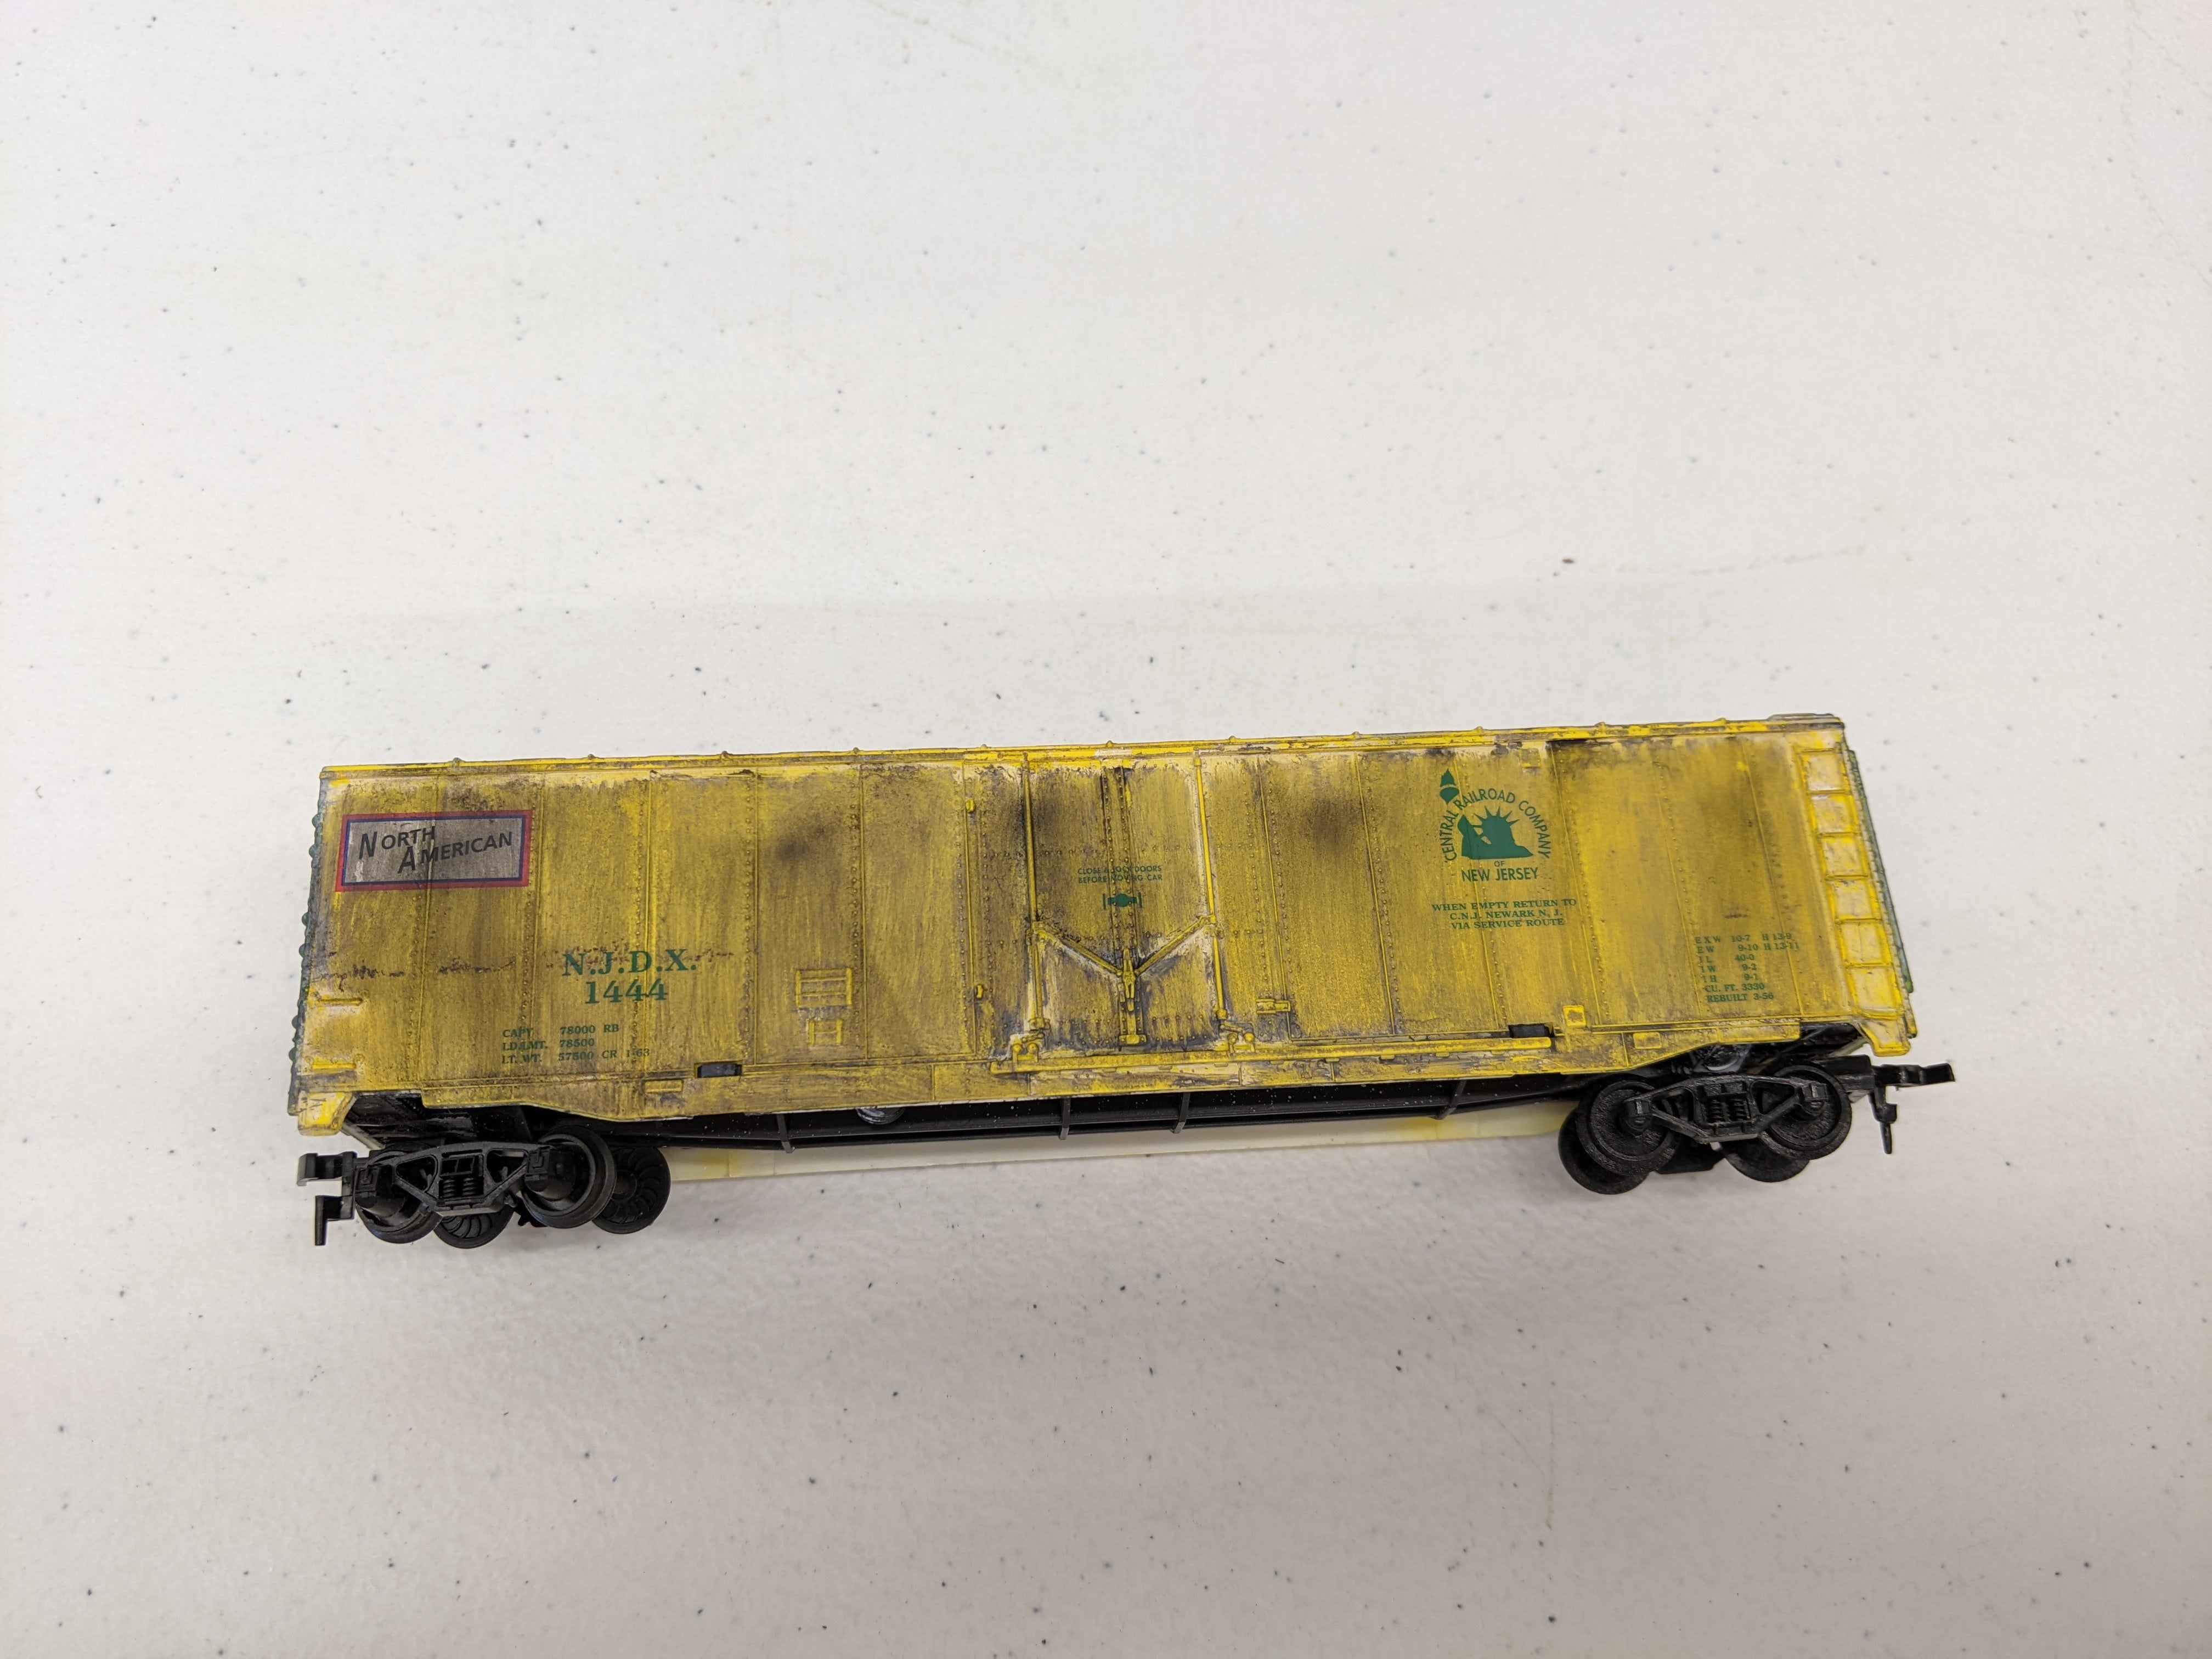 USED IHC HO Scale, 50' Box Car, New Jersey Central NJDX #1444, Weathered